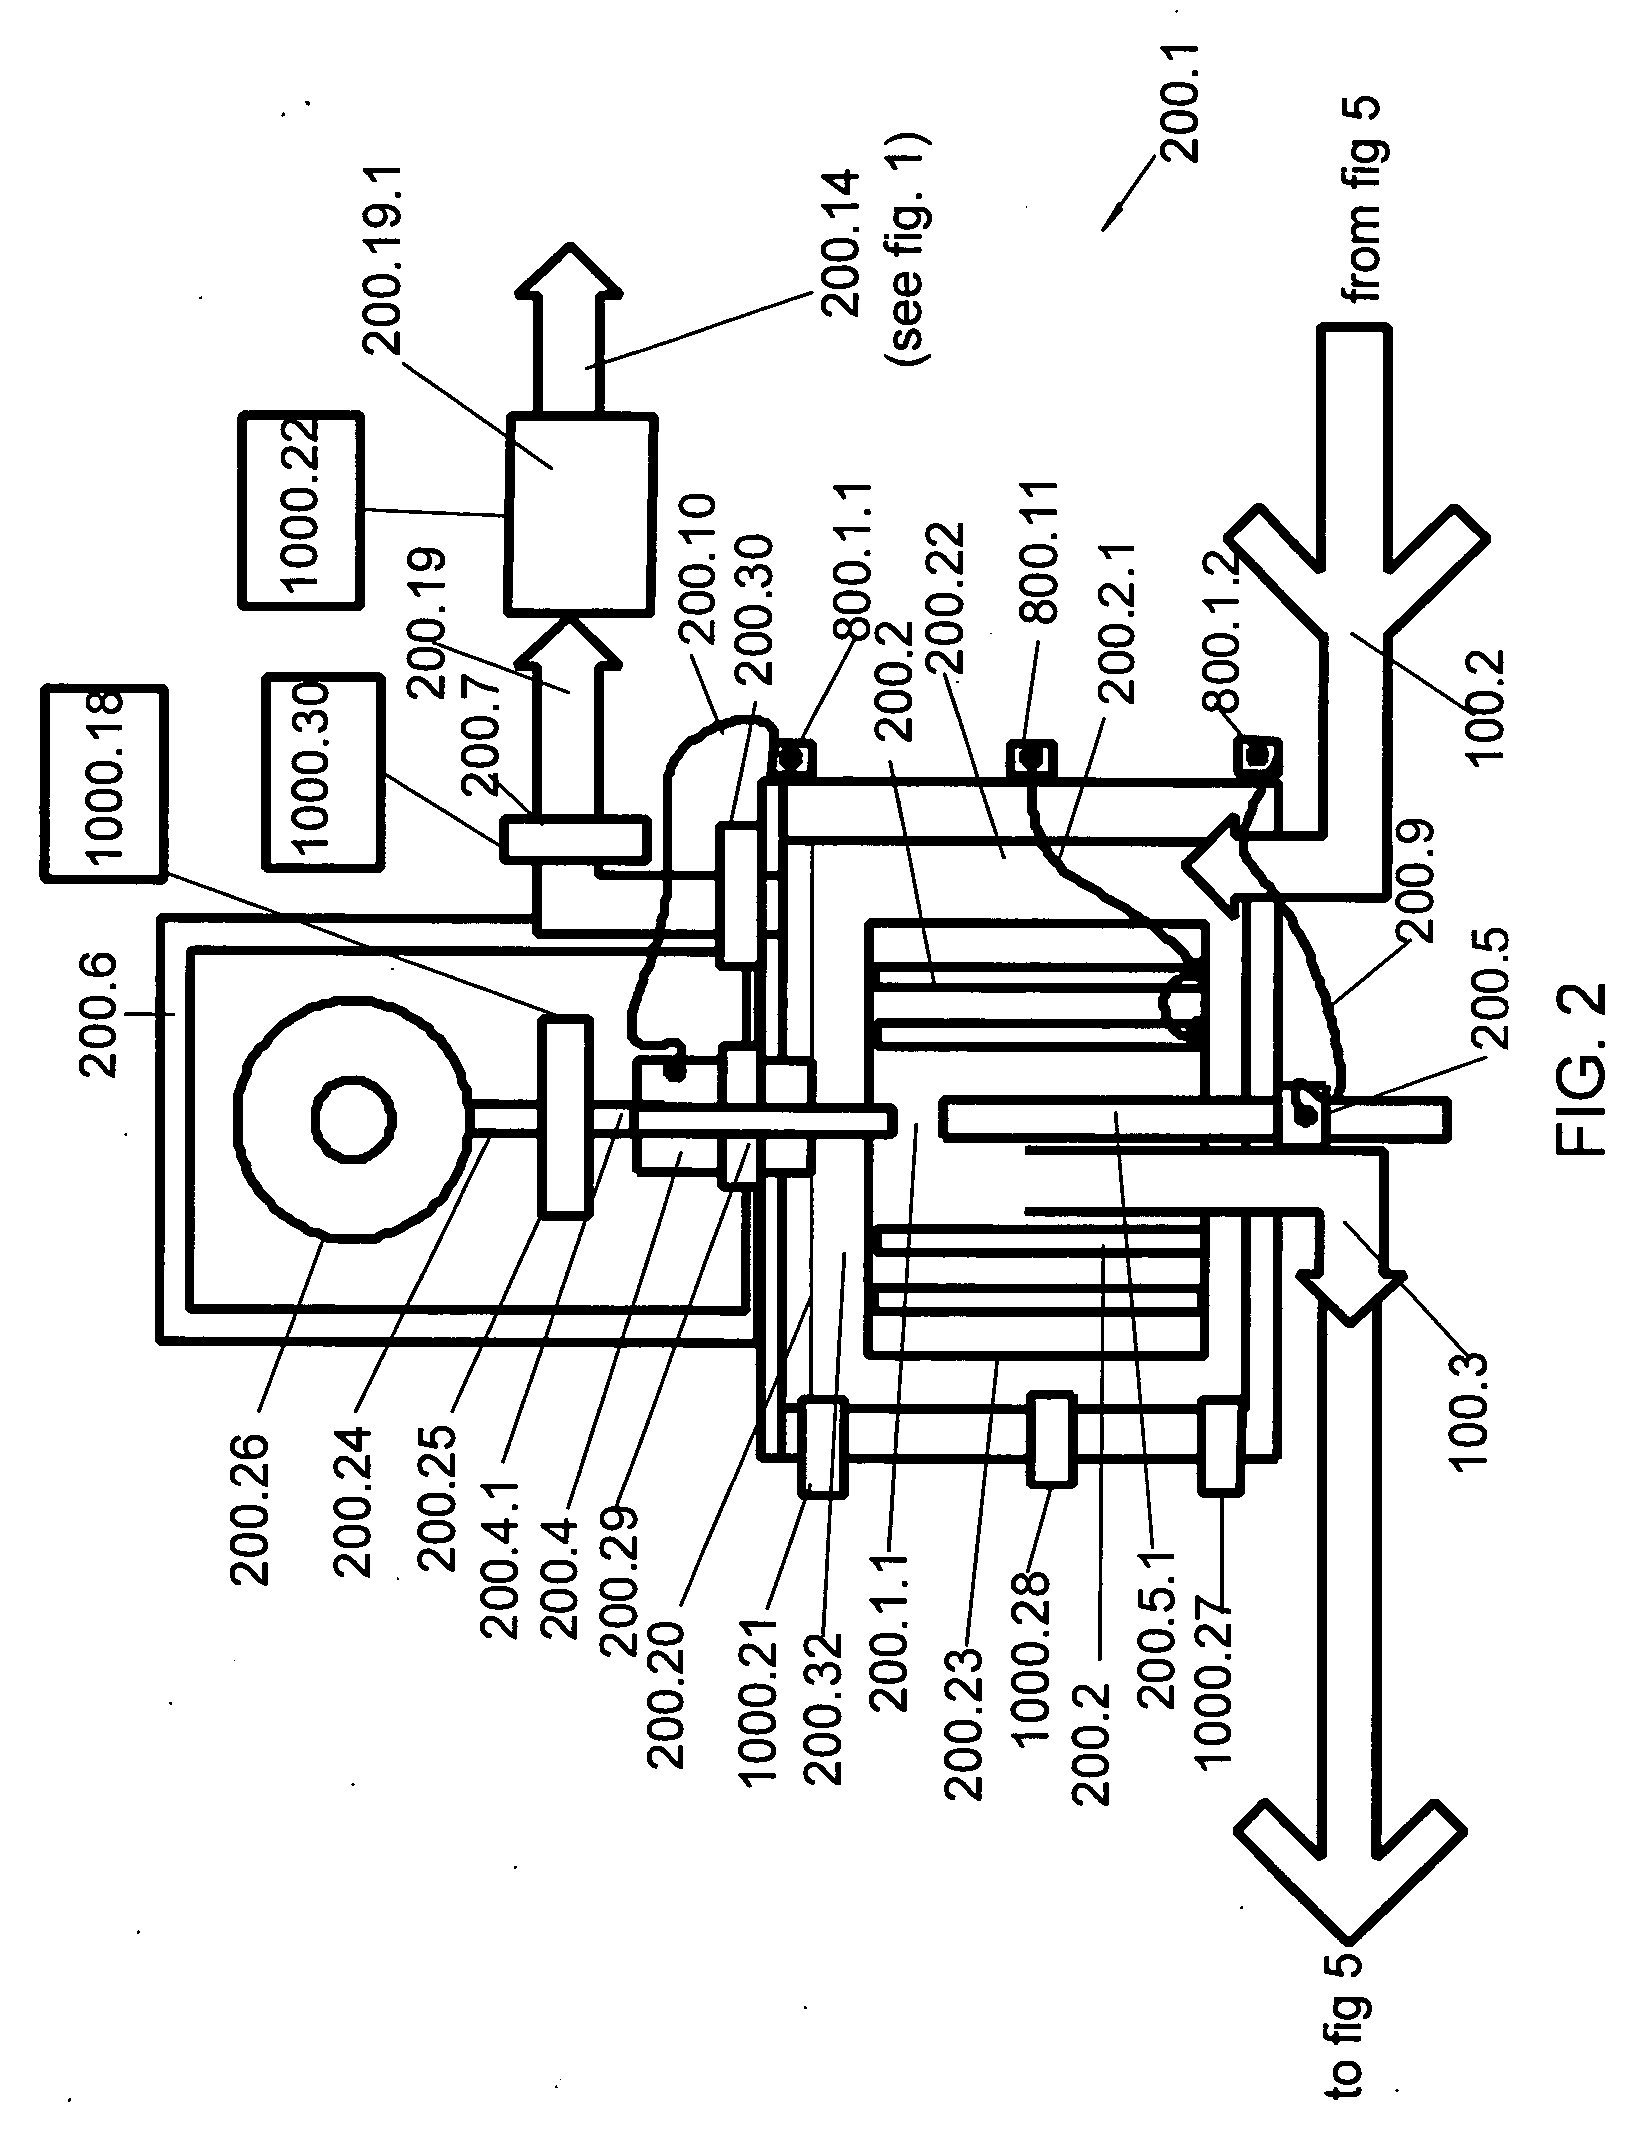 Arc-hydrolysis fuel generator with energy recovery